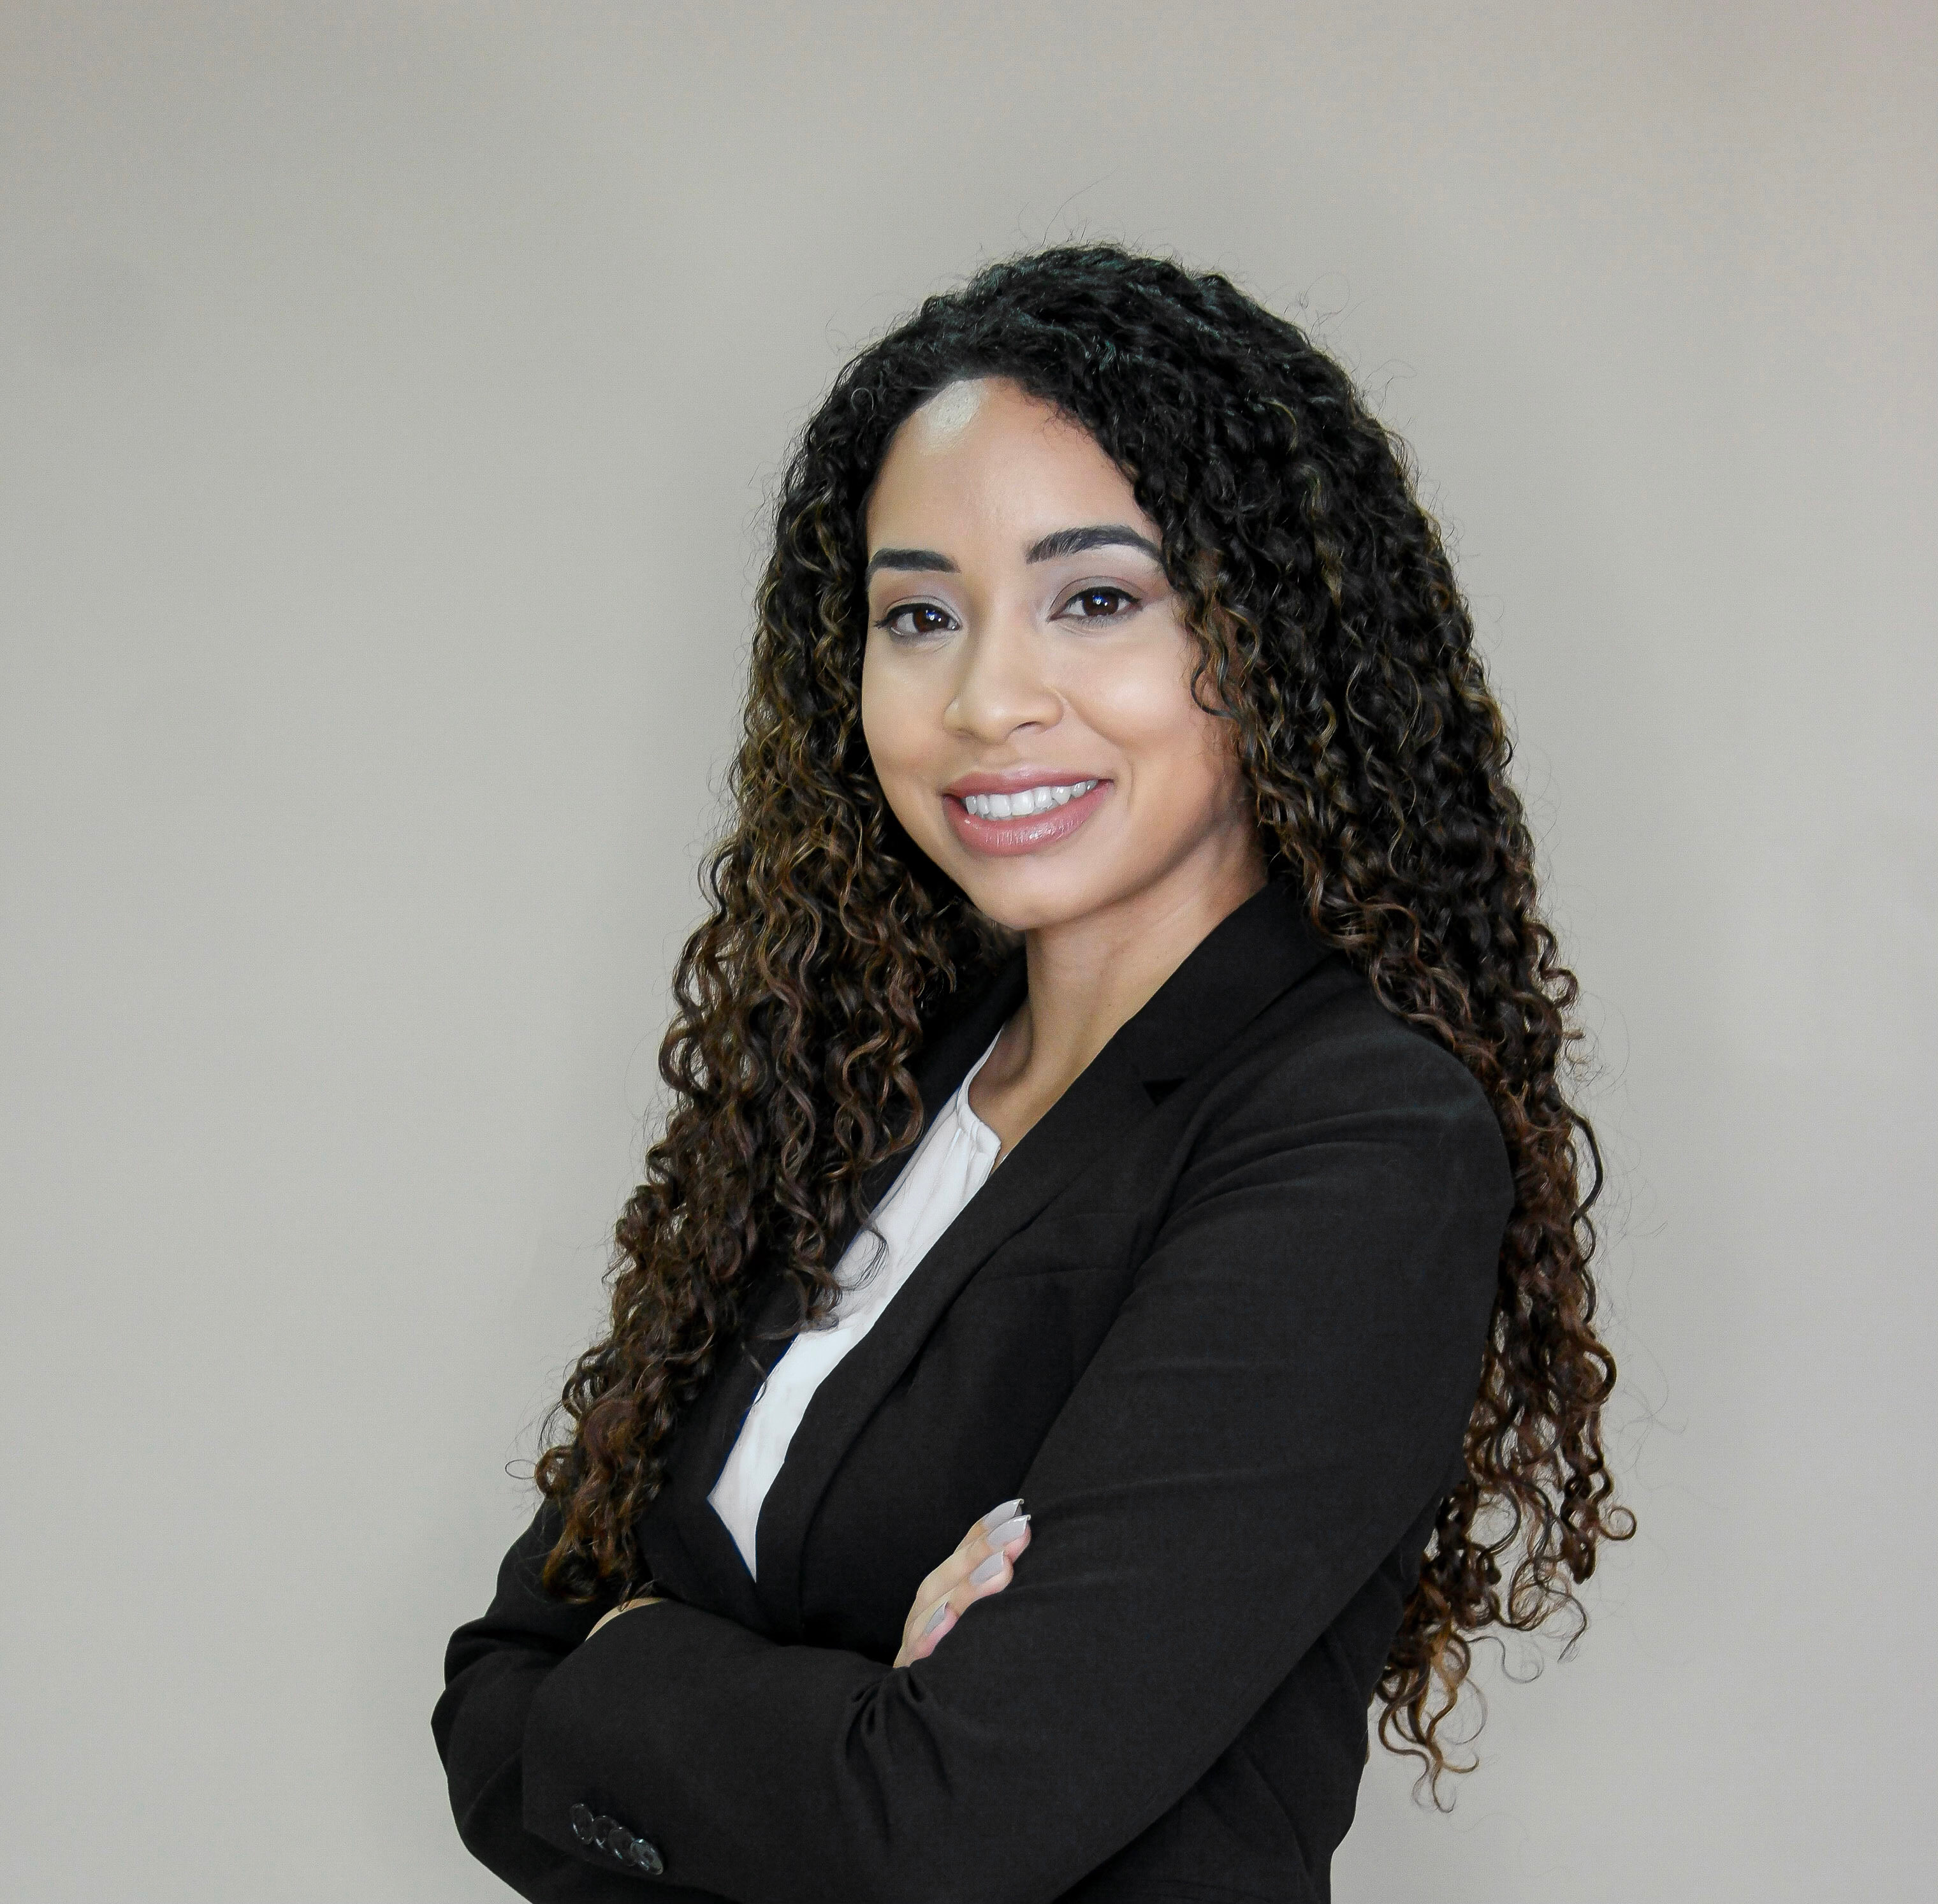 Natalie Gonzalez is of counsel to Cordero Law LLC and represents clients in the business and entertainment sectors